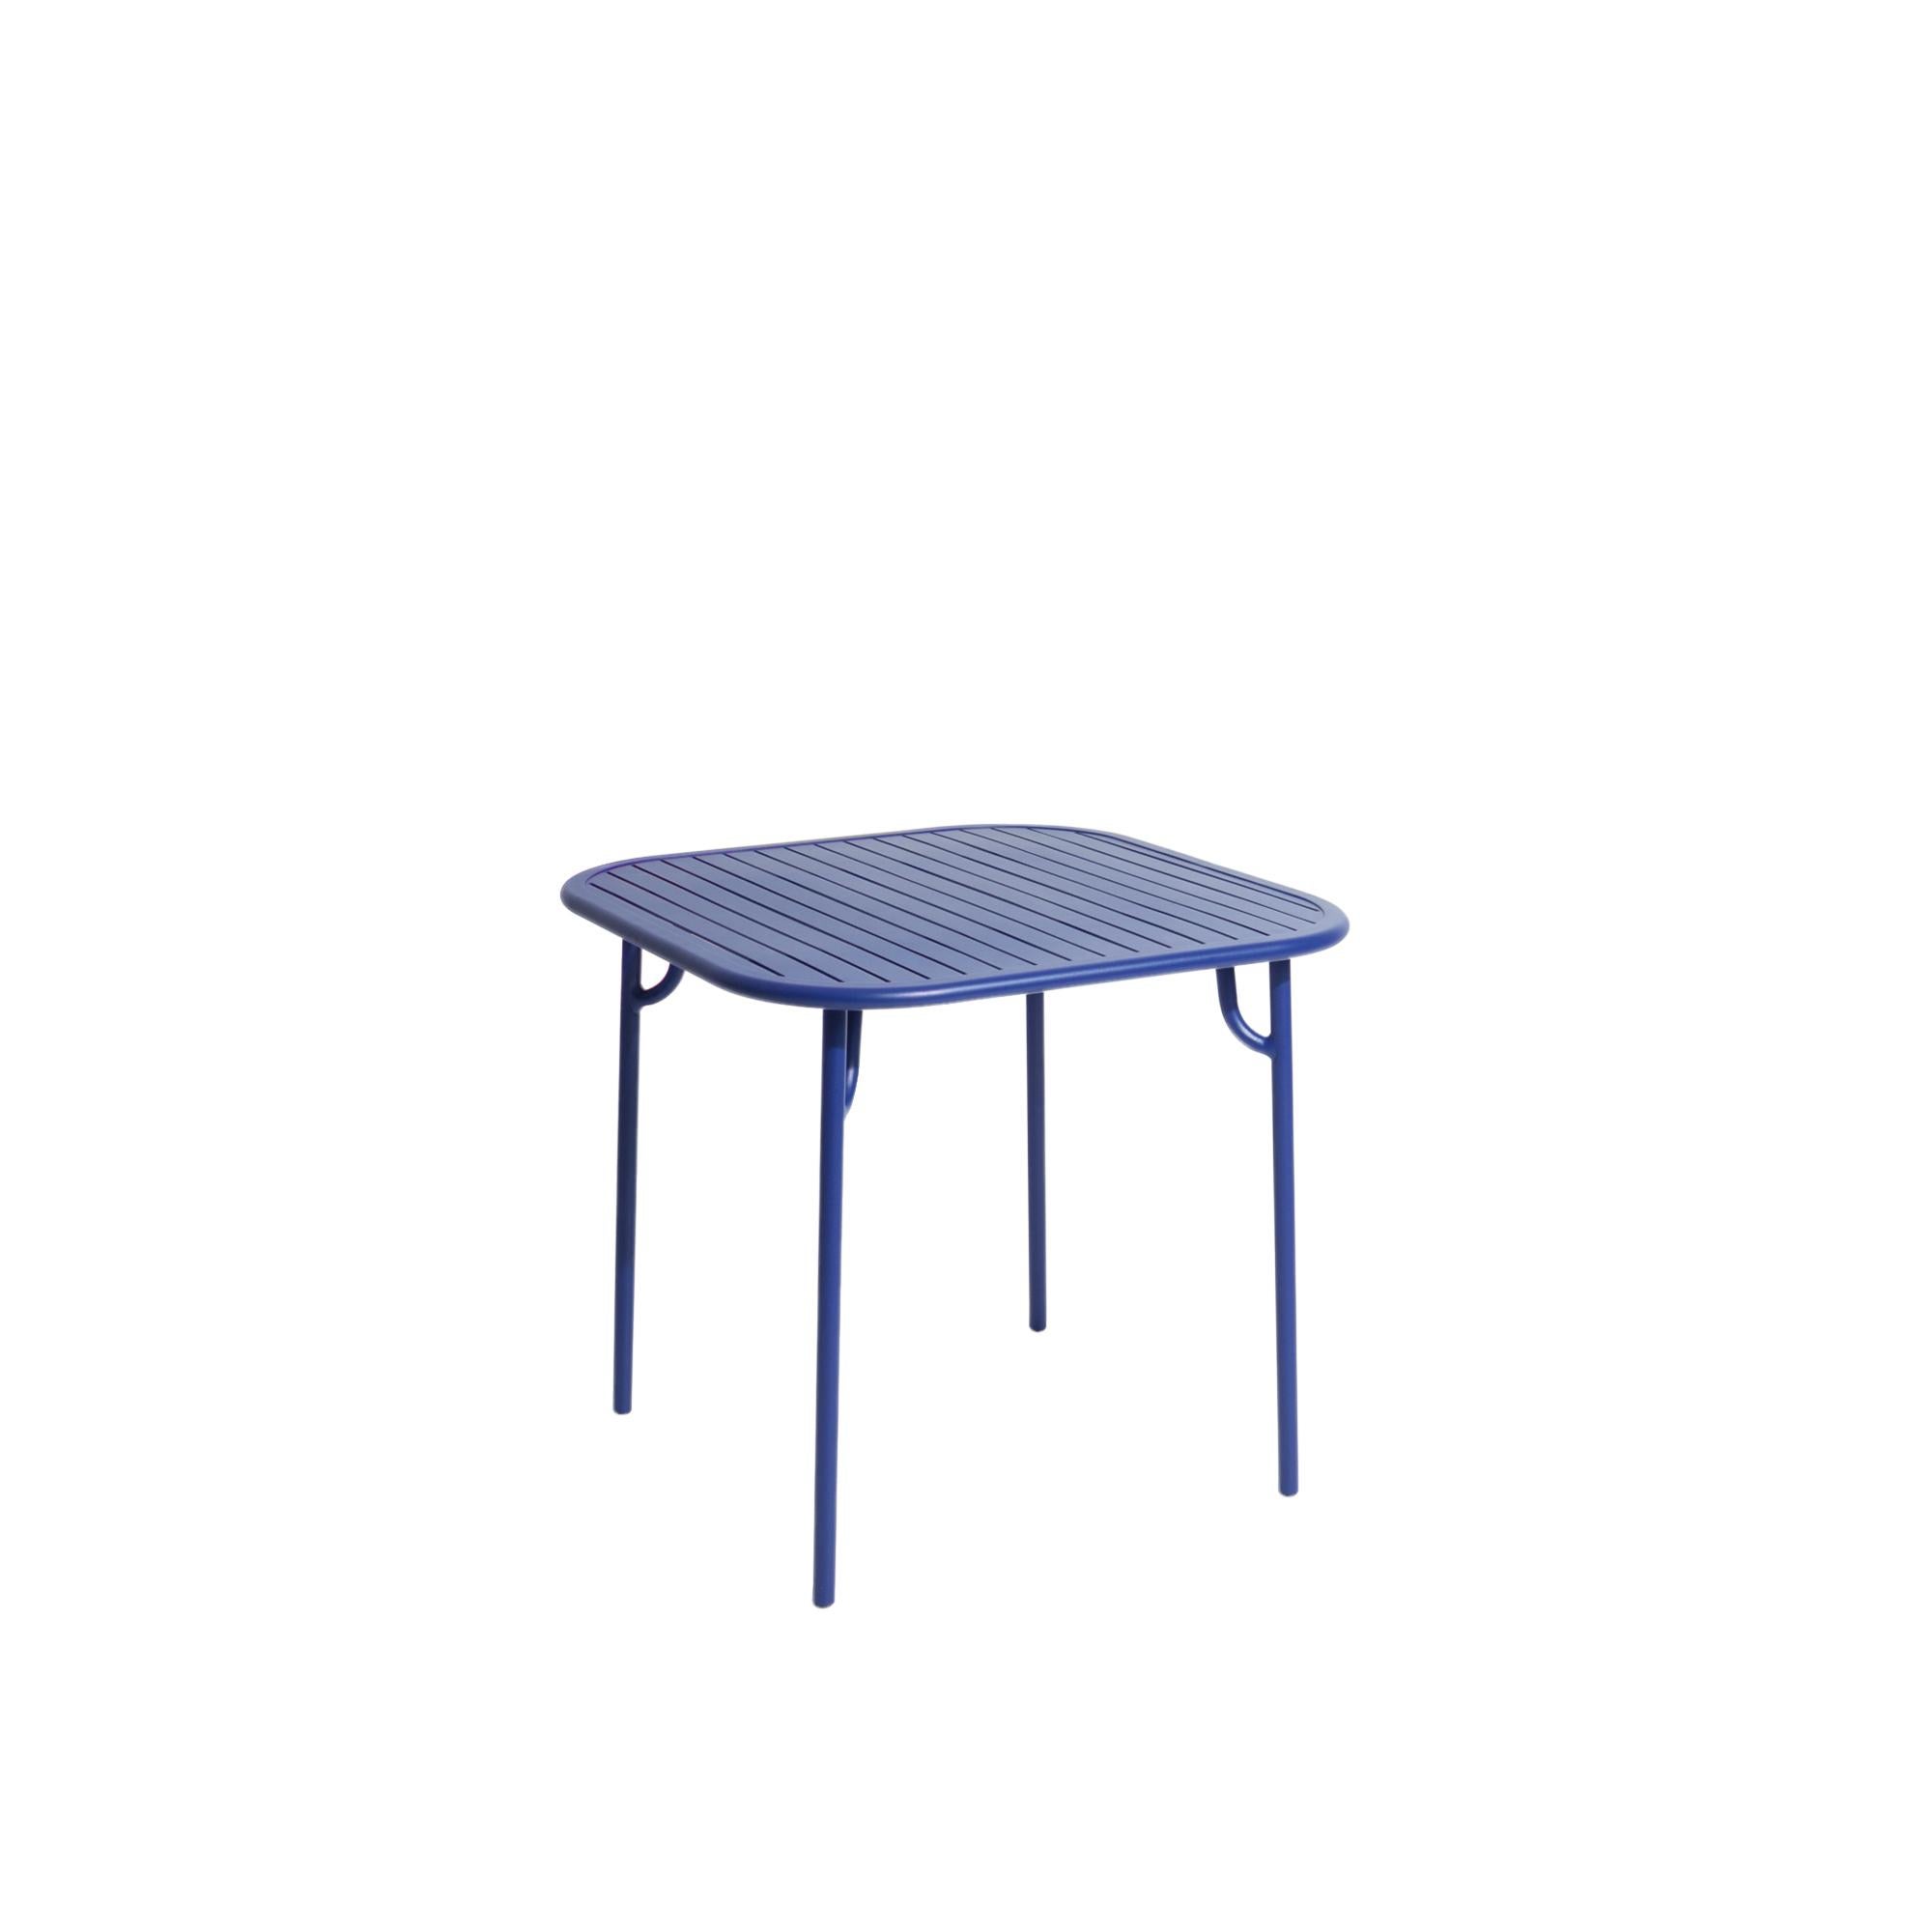 Petite Friture Week-End Square Dining Table in Blue Aluminium with Slats by Studio BrichetZiegler, 2017

The week-end collection is a full range of outdoor furniture, in aluminium grained epoxy paint, matt finish, that includes 18 functions and 8